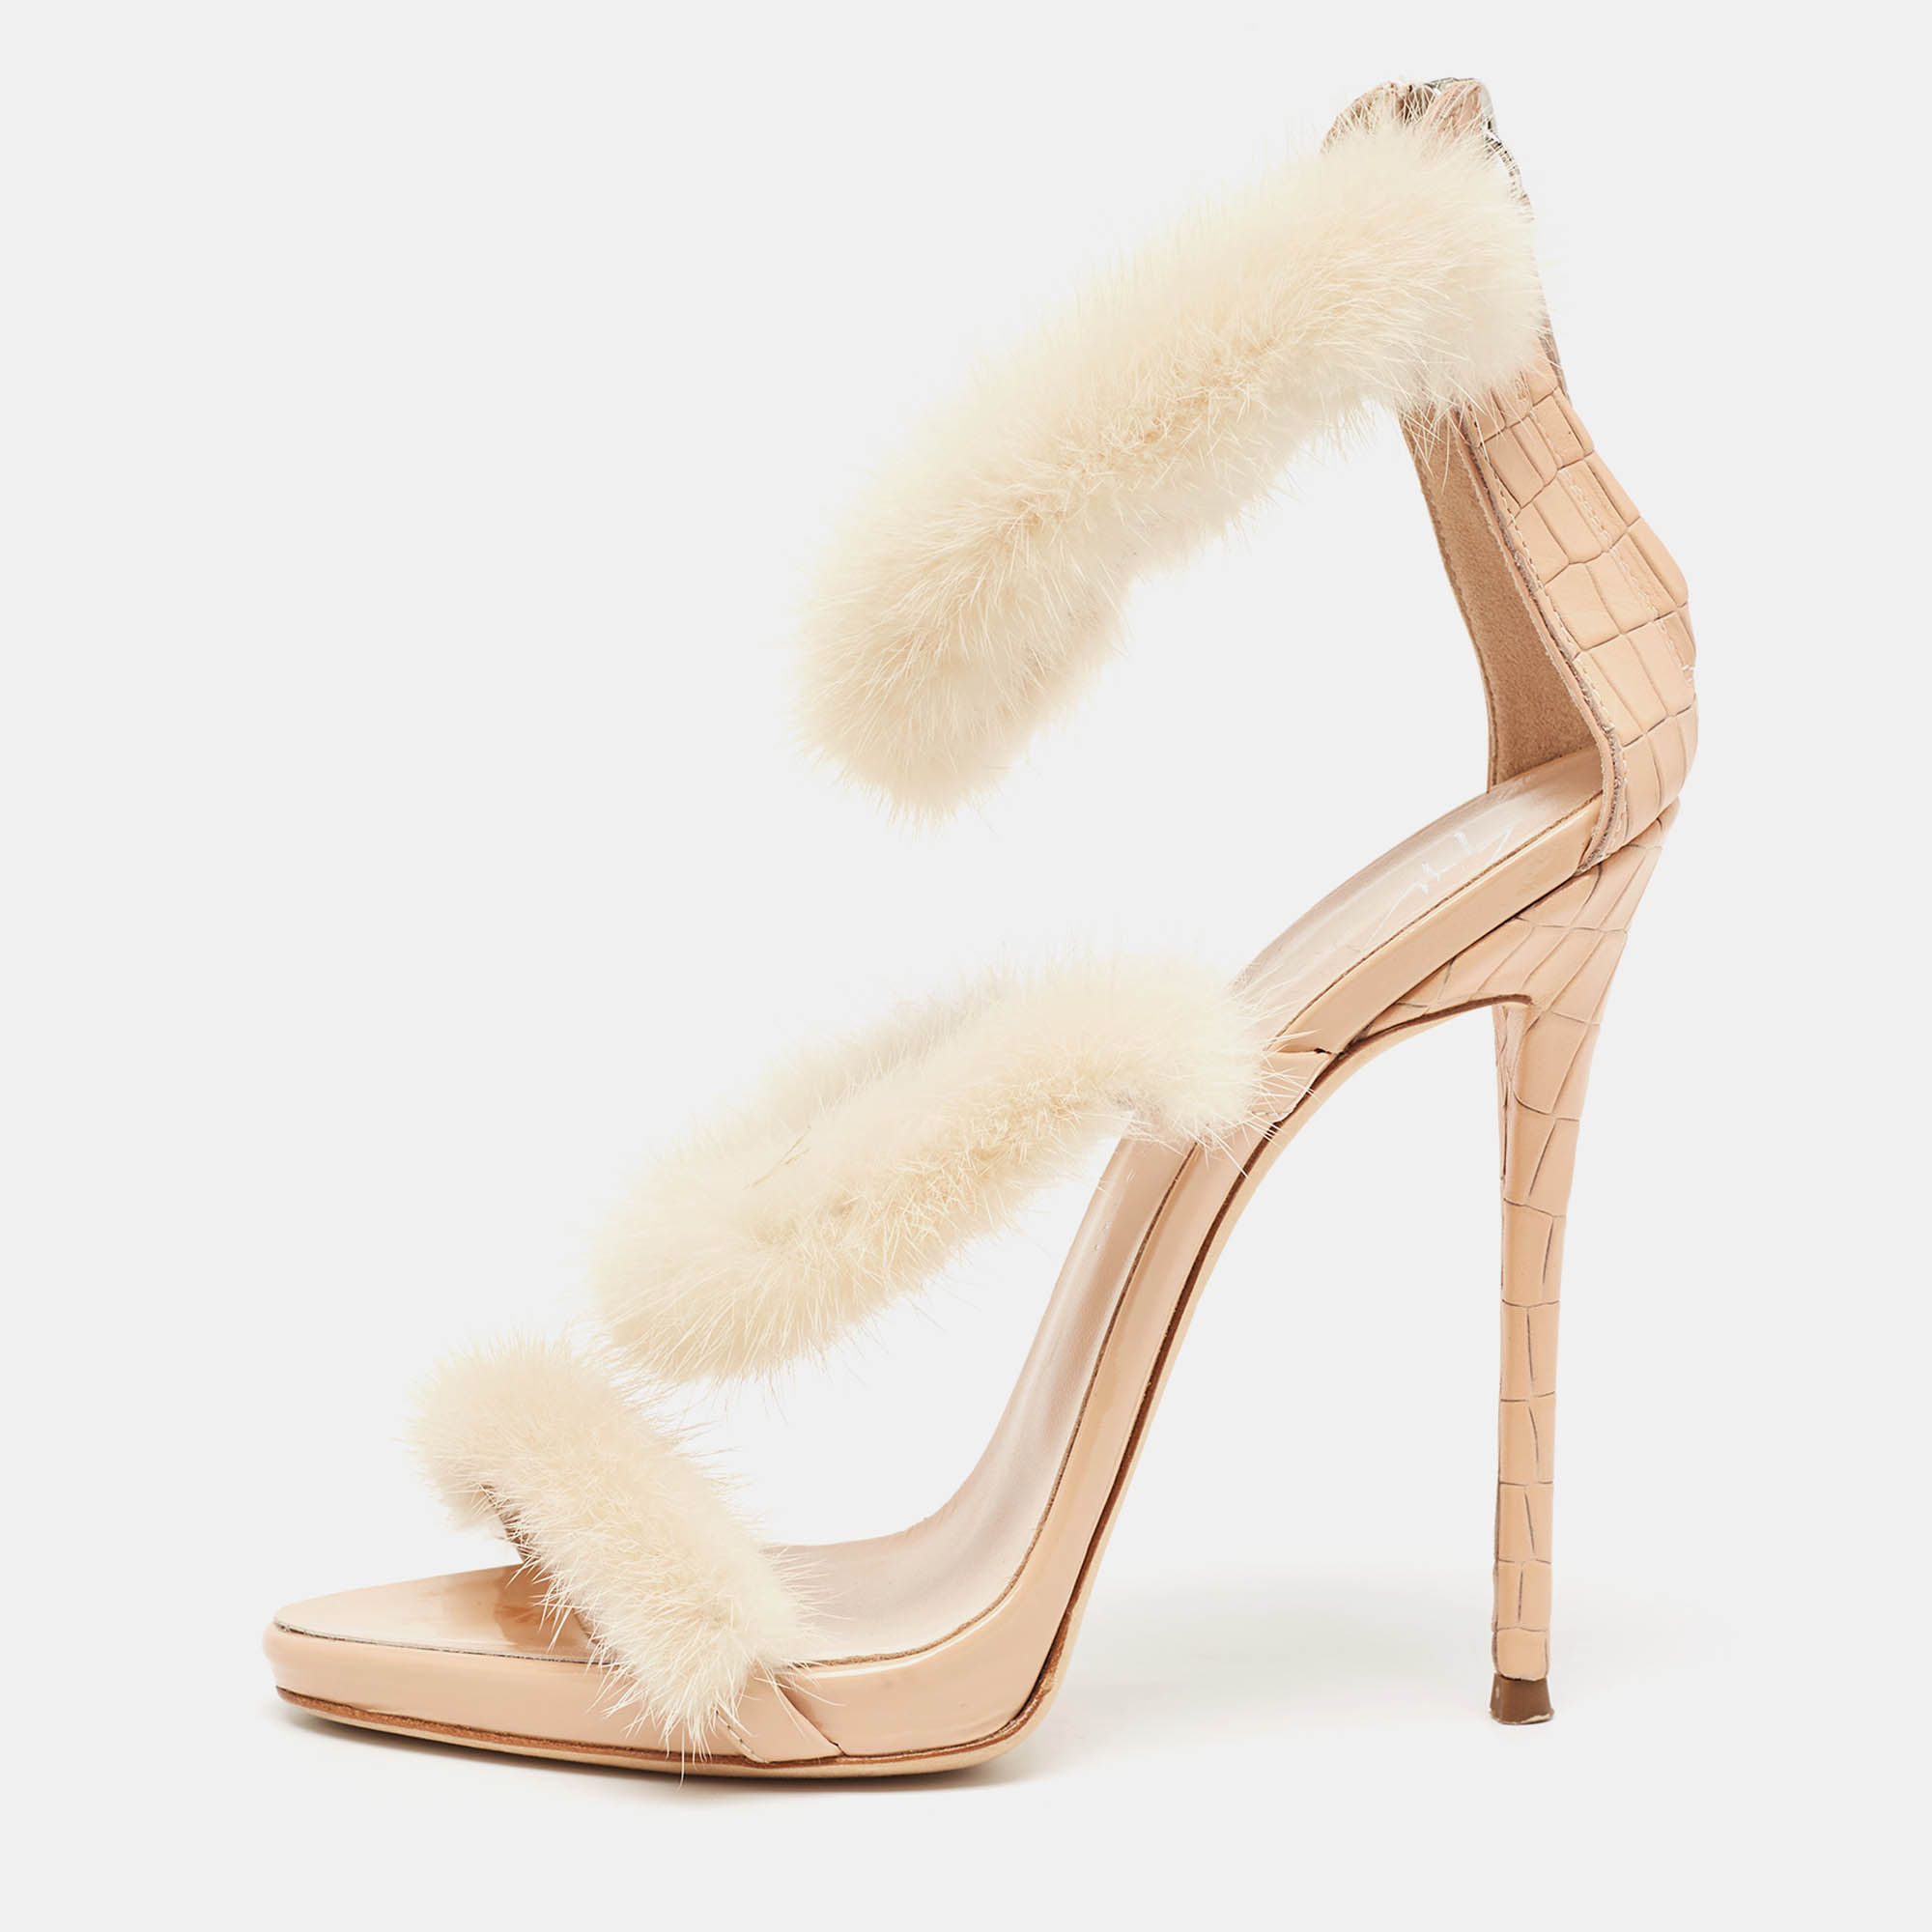 Giuseppe zanotti beige mink fur and textured leather ankle strap sandals size 37